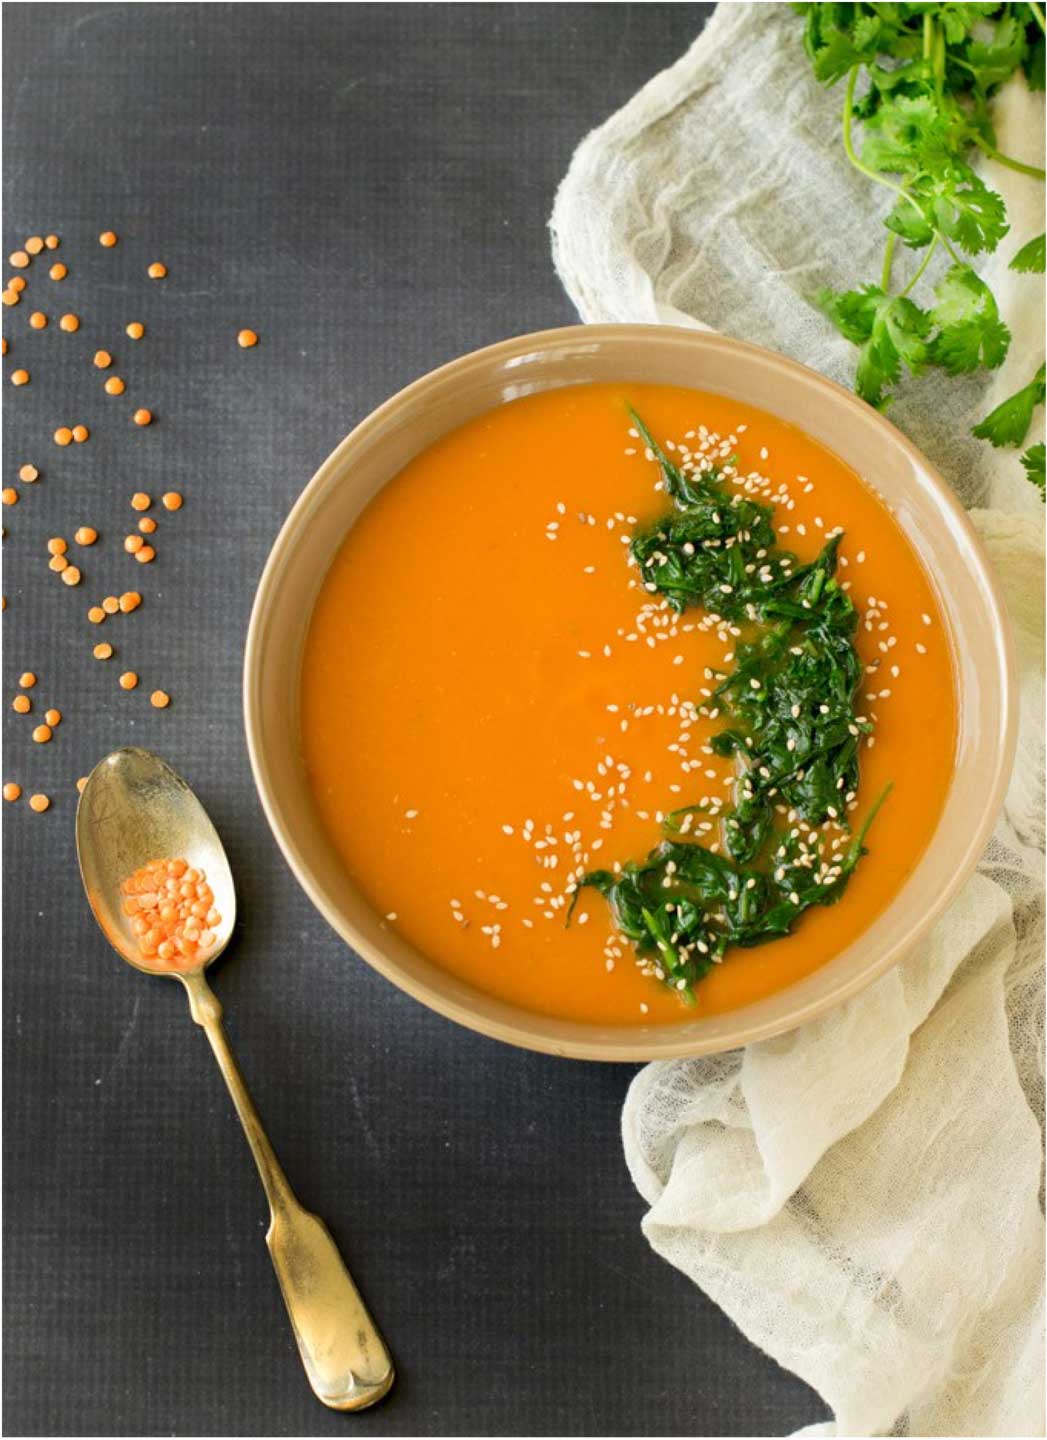 Love vegetable soup? Then you don’t want to miss our great line-up of yummy veggie soups that are super quick and easy in your Instant Pot. Here’s a good place to start: Beta Carotene Booster Vegetable & Red Lentil Soup (vegan) from Khushboo at Carve Your Craving. Yum!